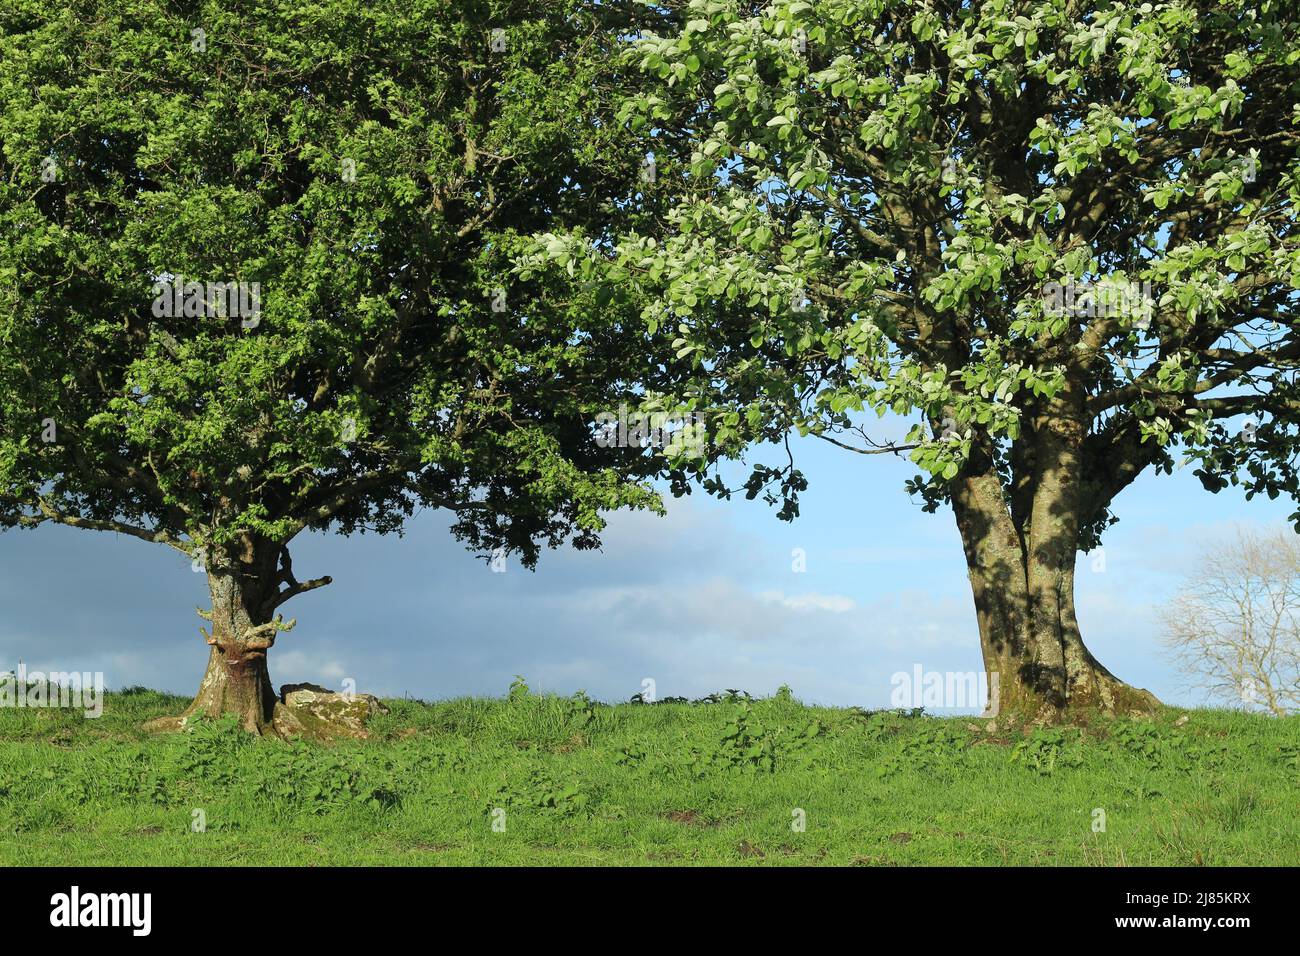 Hornbeam tree and hawthorn tree growing side, with branches intertwined, in field in rural Ireland Stock Photo